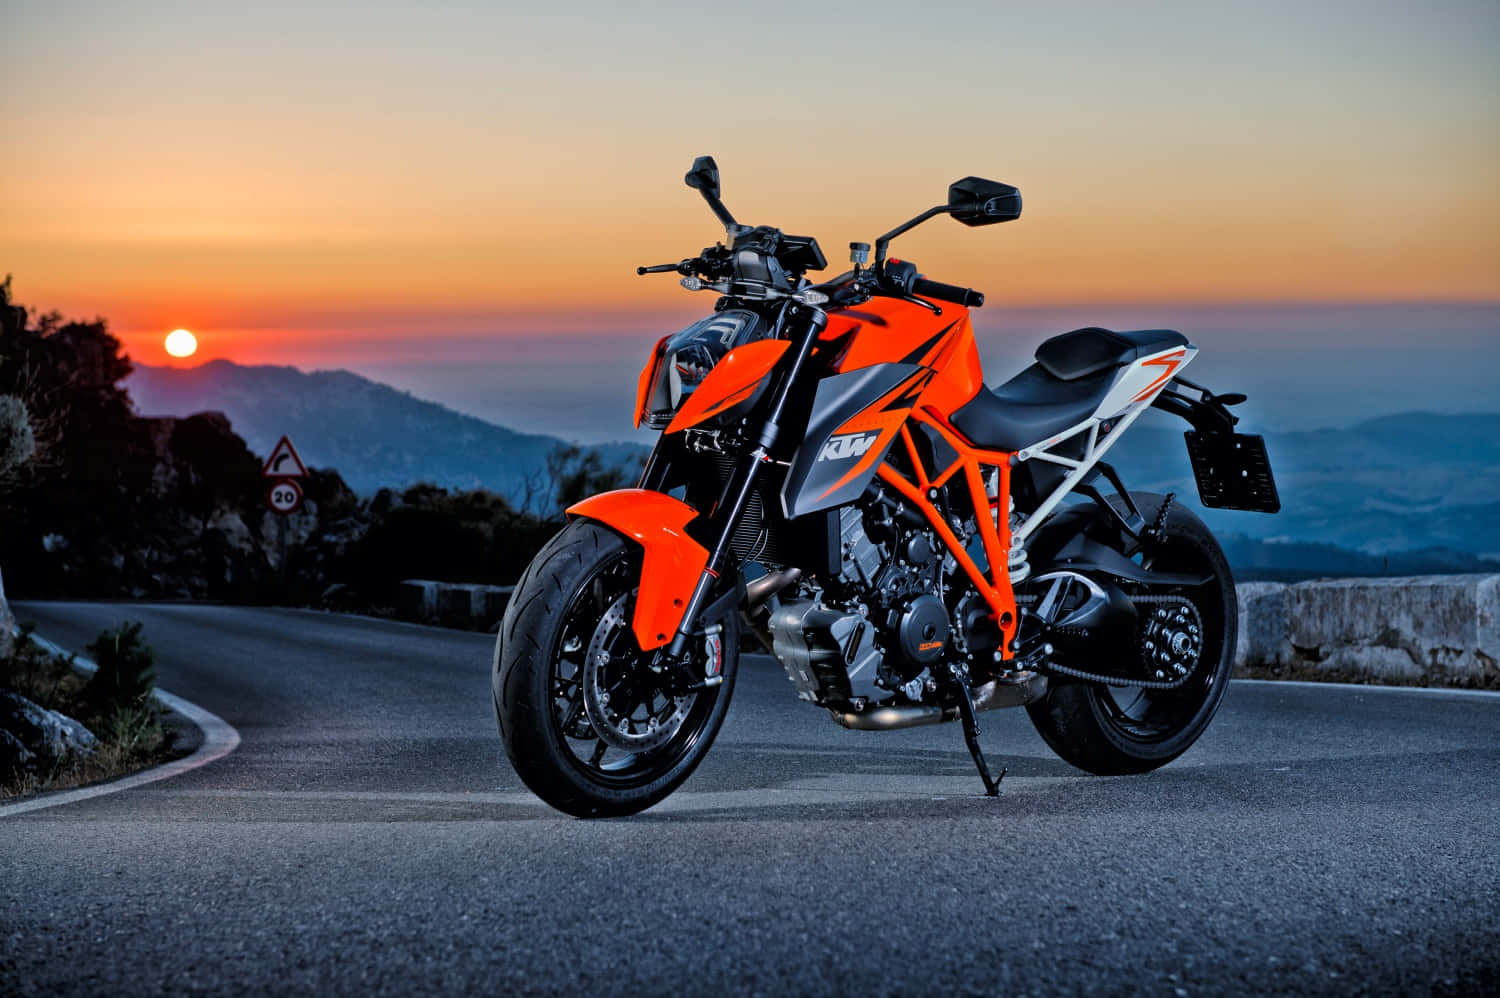 Ktm Against Sunset Pictures